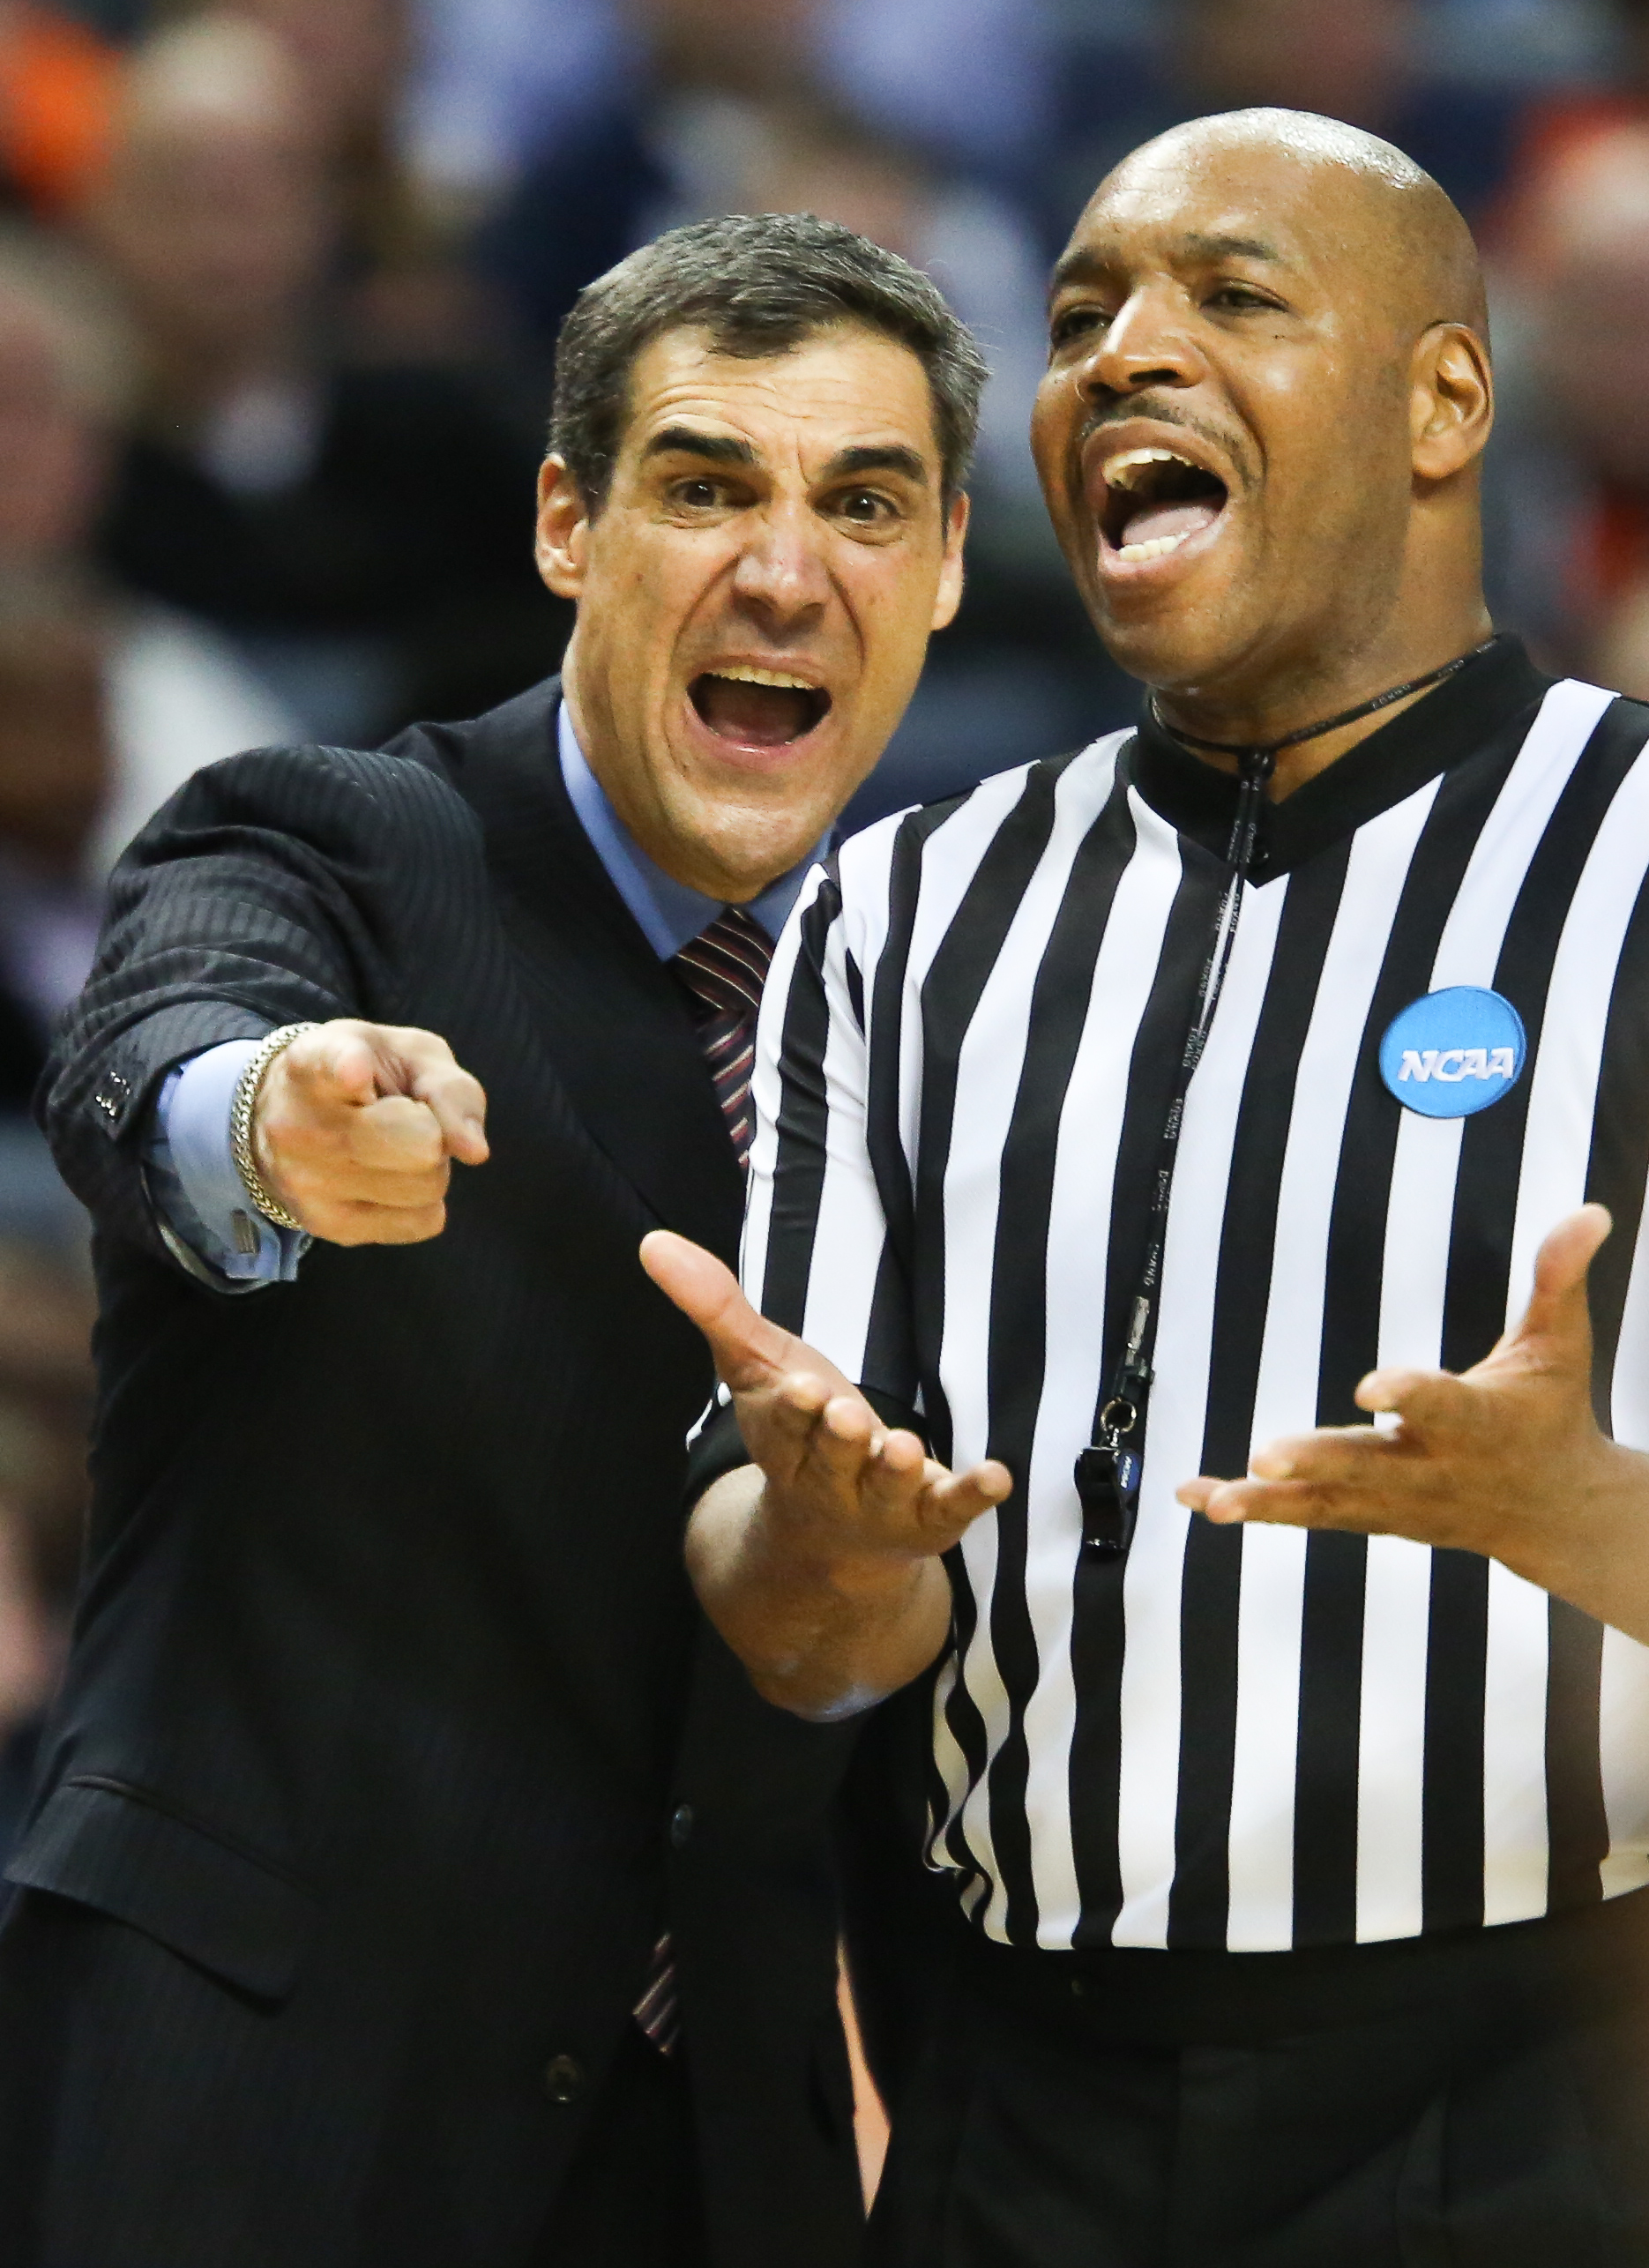 Head coach Jay Wright of the Villanova Wildcats argues a call with official Antinio Petty as his team trails late in the second half against the Connecticut Huskies during the third round of the 2014 NCAA Men's Basketball Championships at the First Niagara Center on Saturday, March 22, 2014 in Buffalo, N.Y Villanova lost 77-65. Photo By Josh Barber